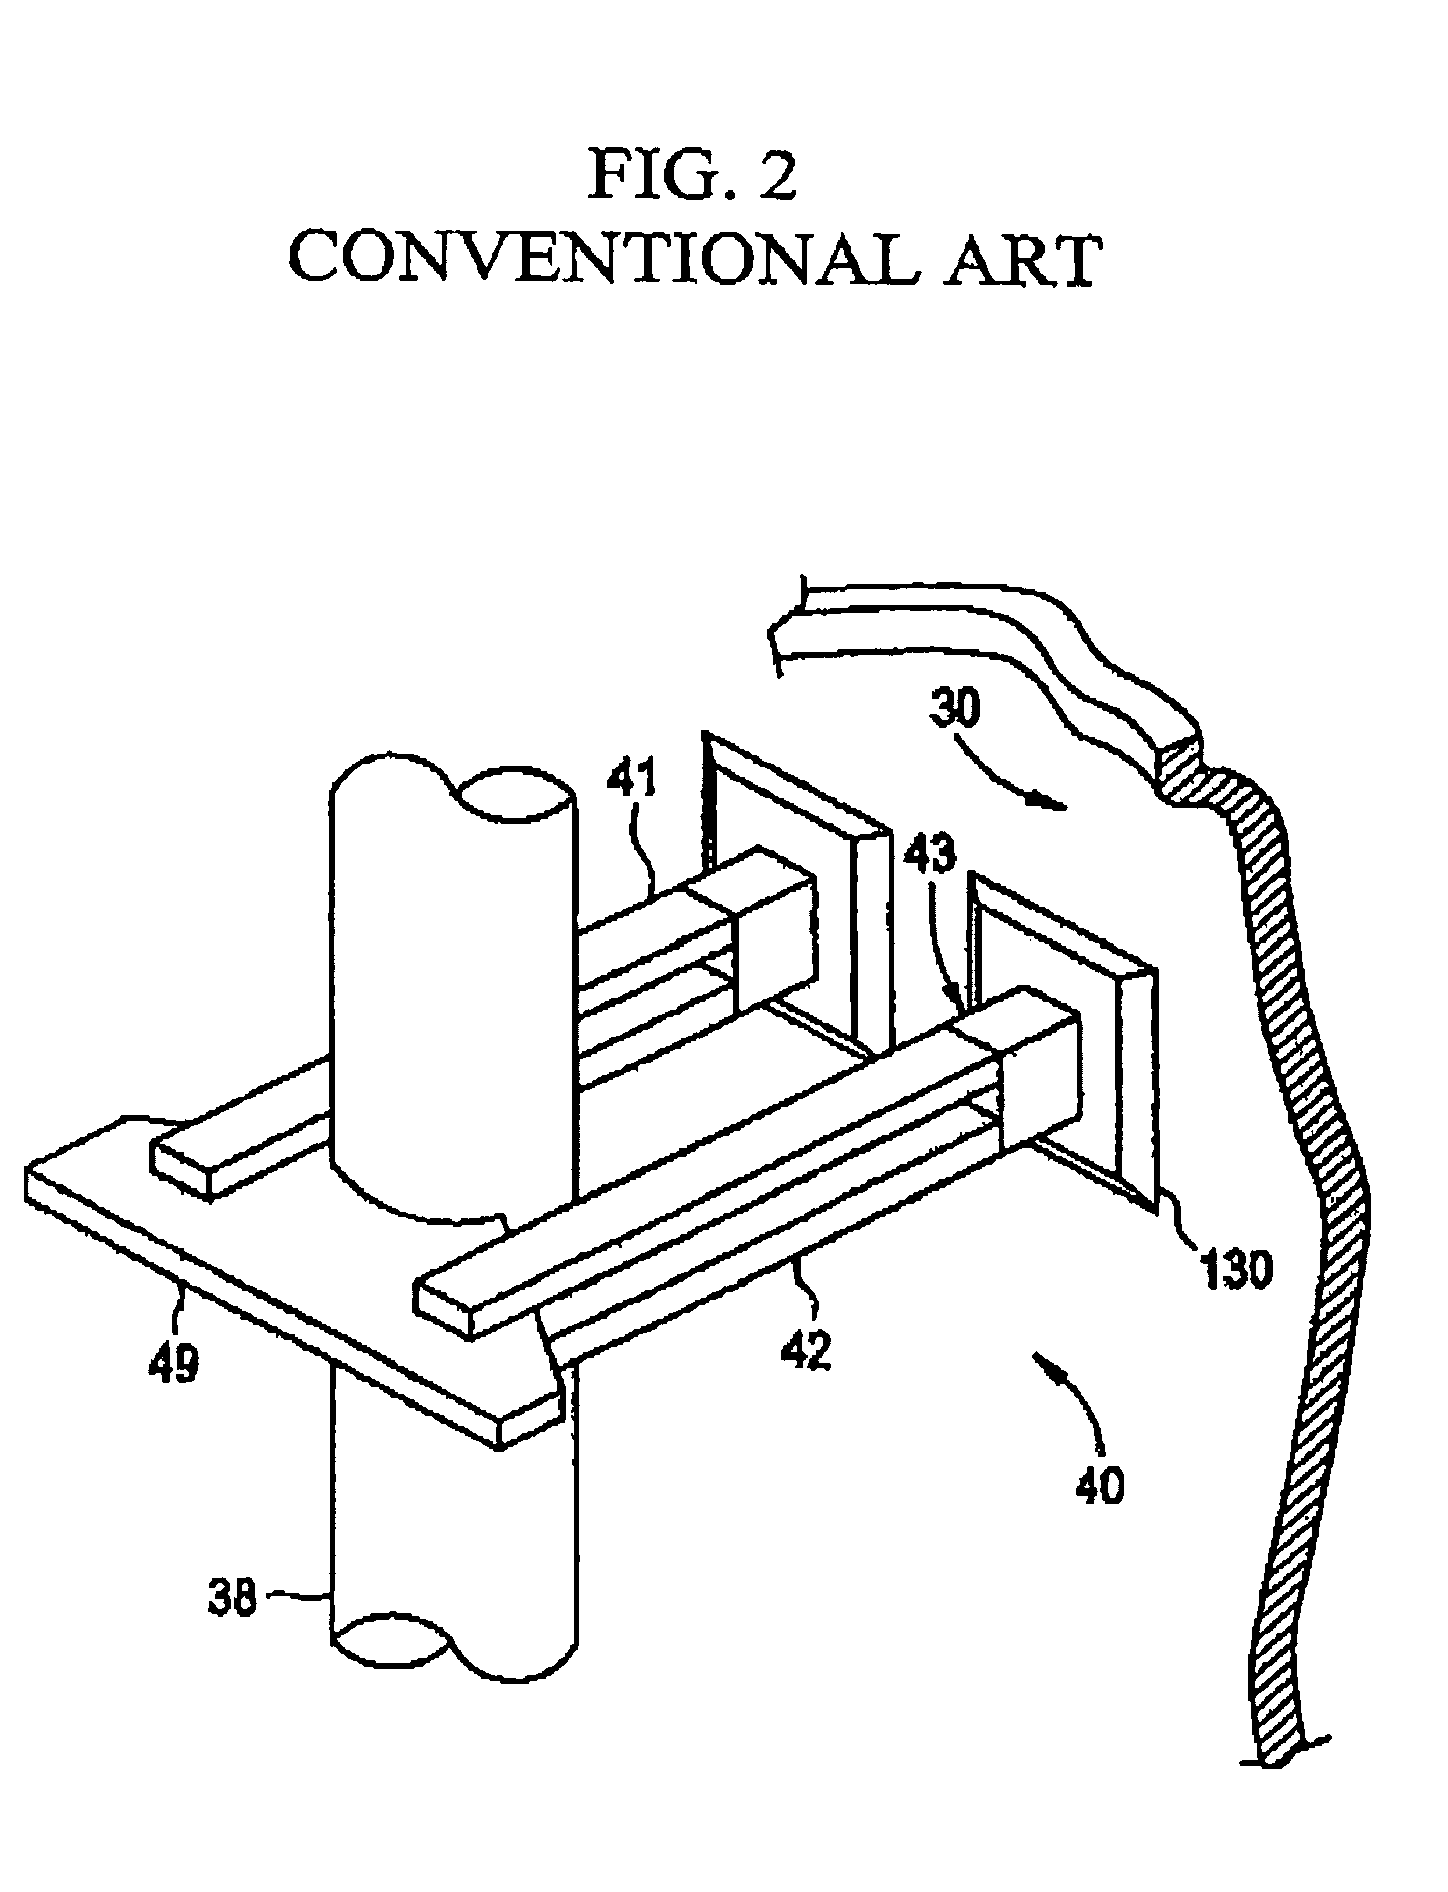 Method and apparatus for clamping a riser brace assembly in nuclear reactor